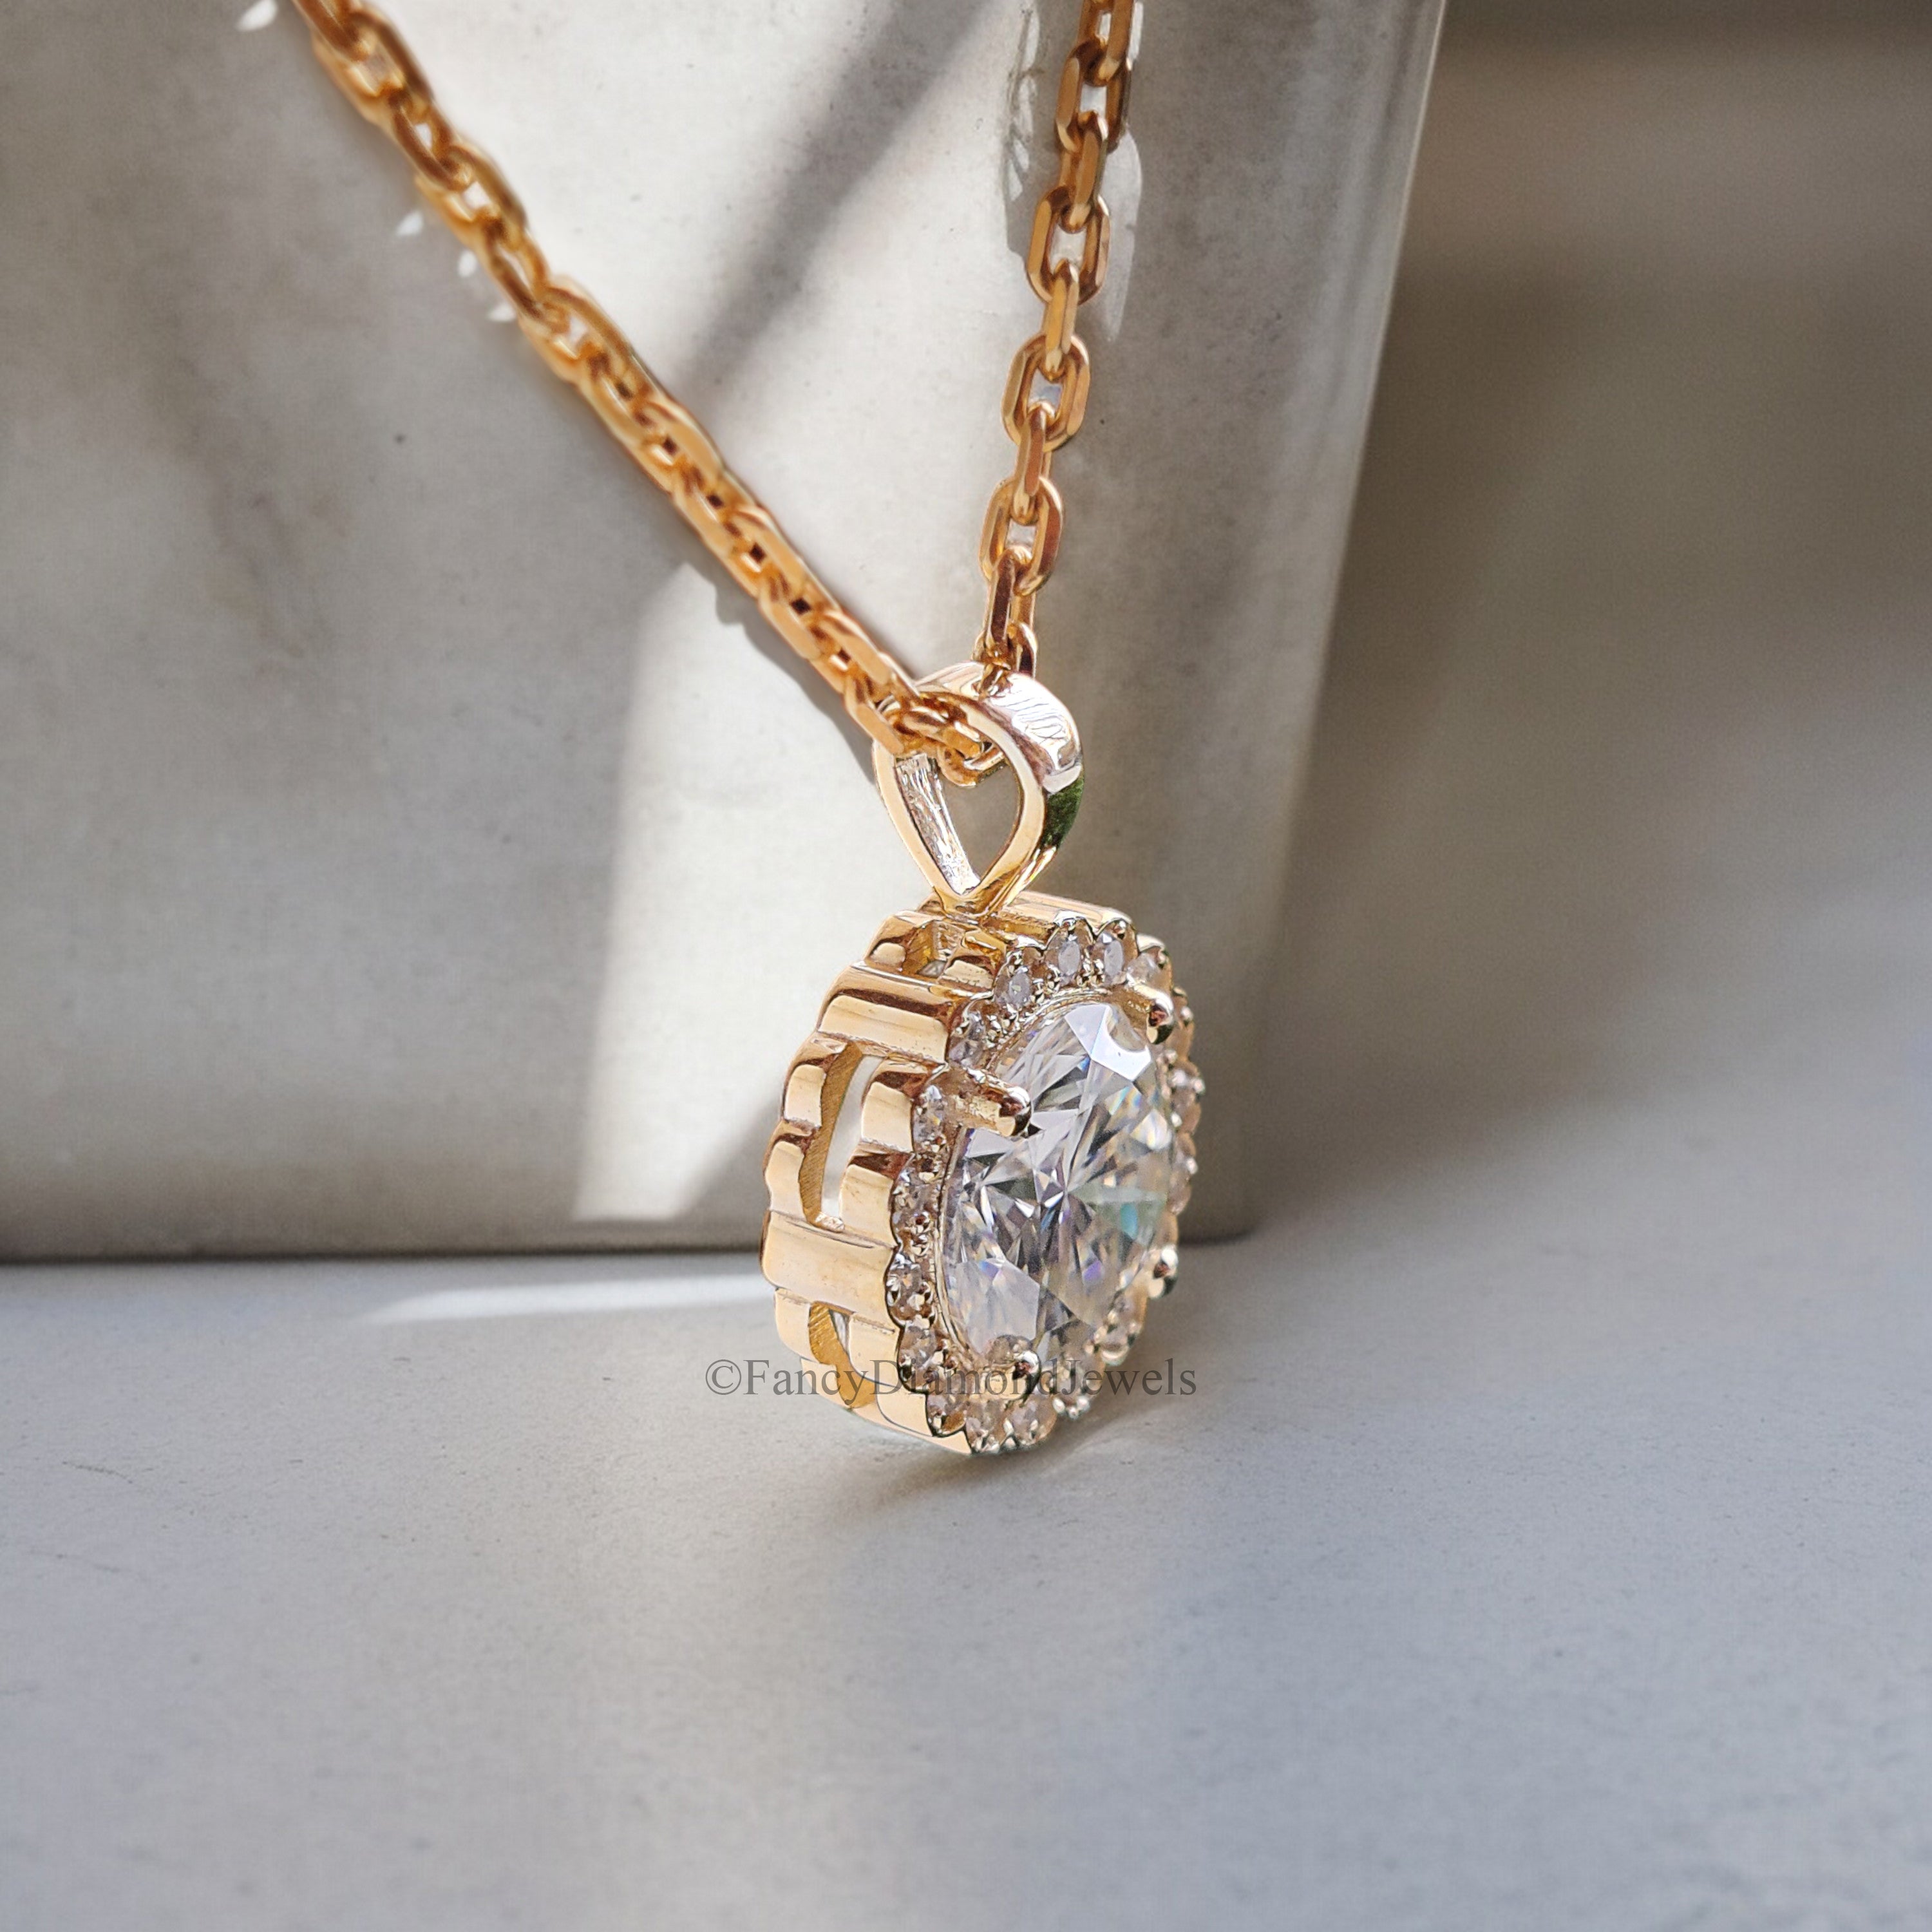 Yellow Gold Halo Pendant Necklace for Women Round Cut Pendant Necklace with Moissanite Stones Necklace for Teen Girls and Women FD189